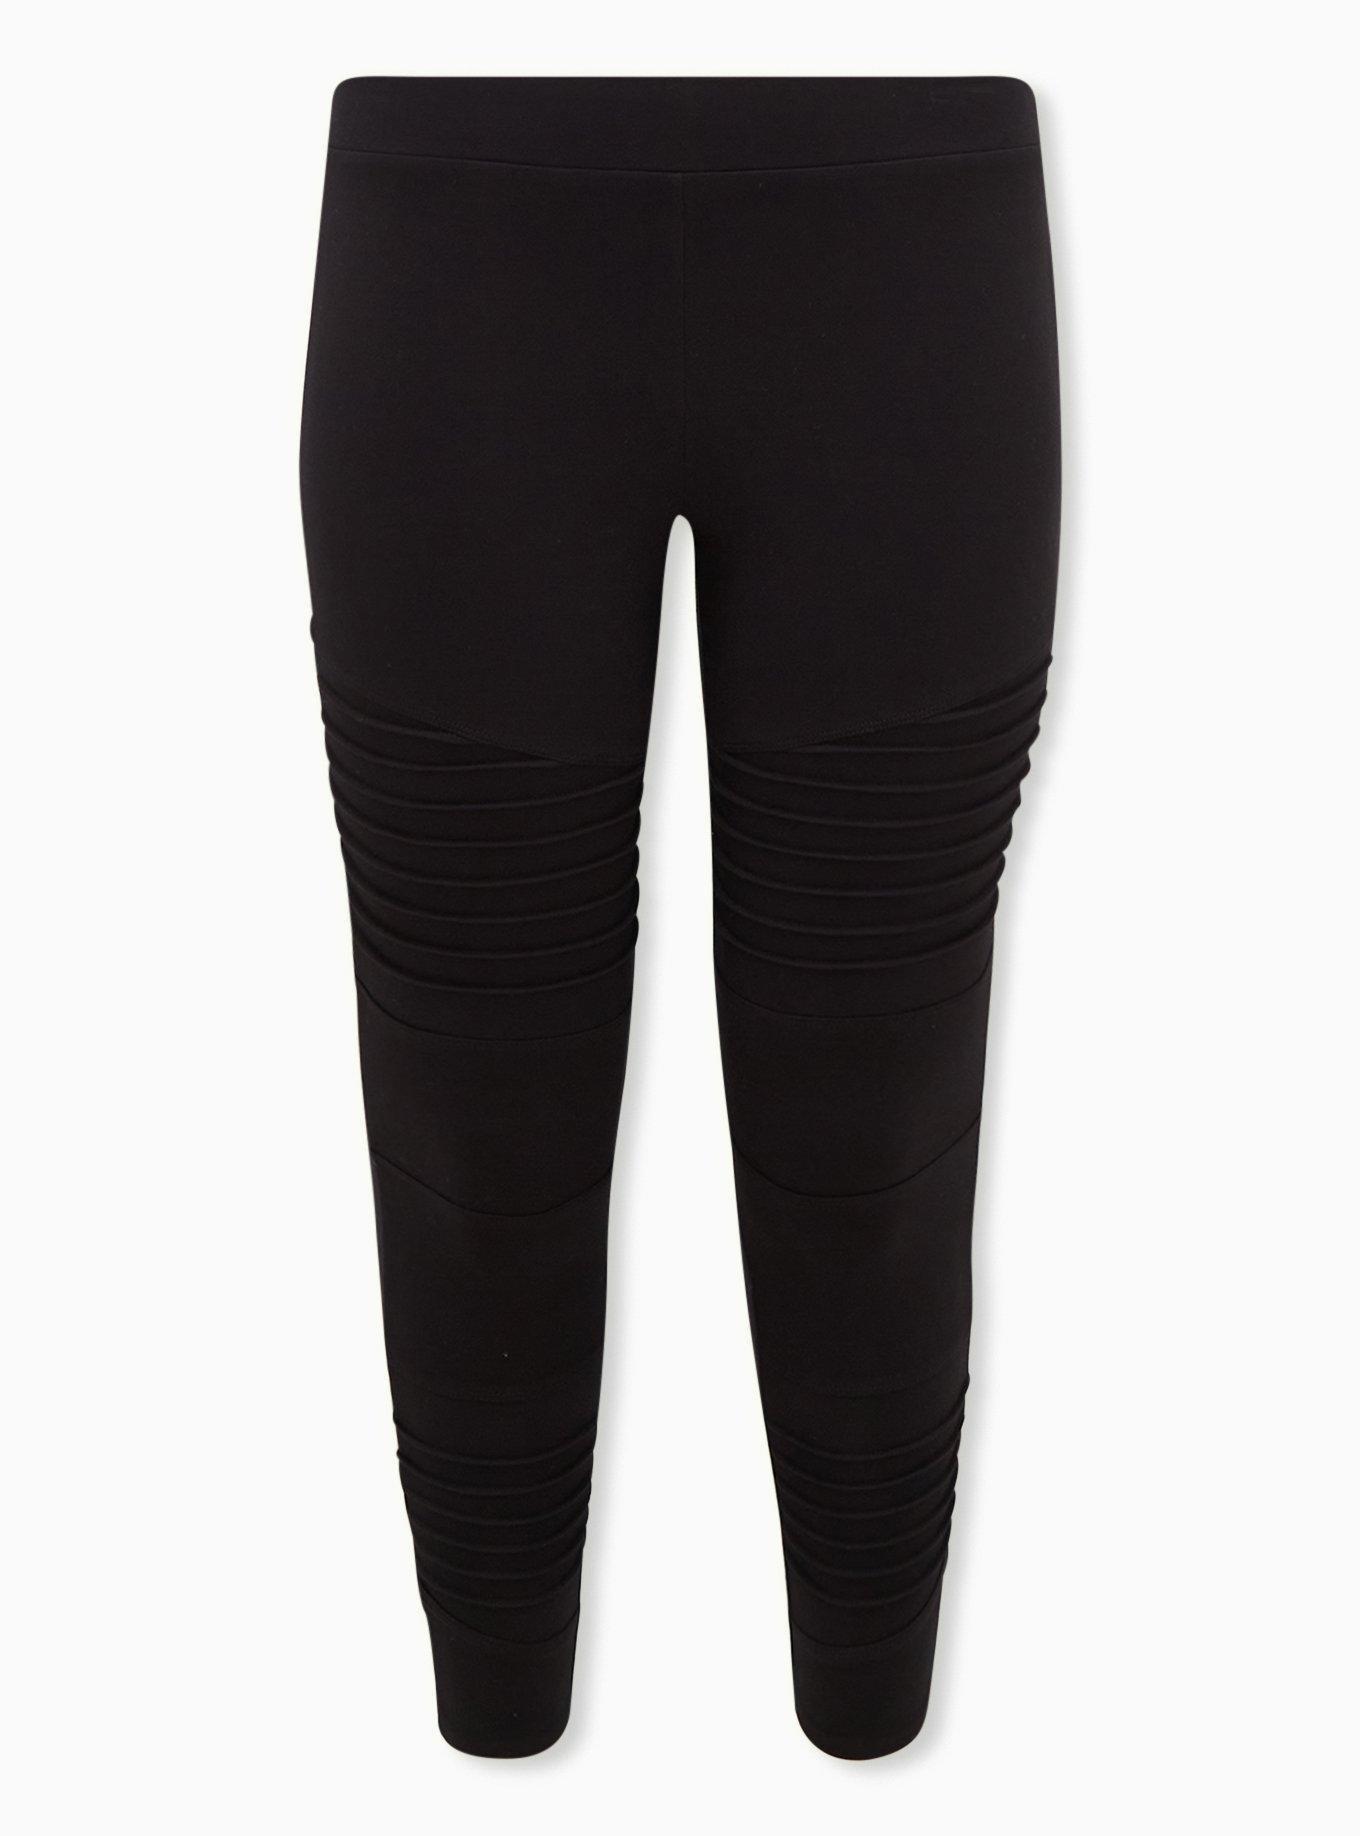 a Day Womens Moto Leggings Large Wide Waistband Black 1 Pair for sale  online